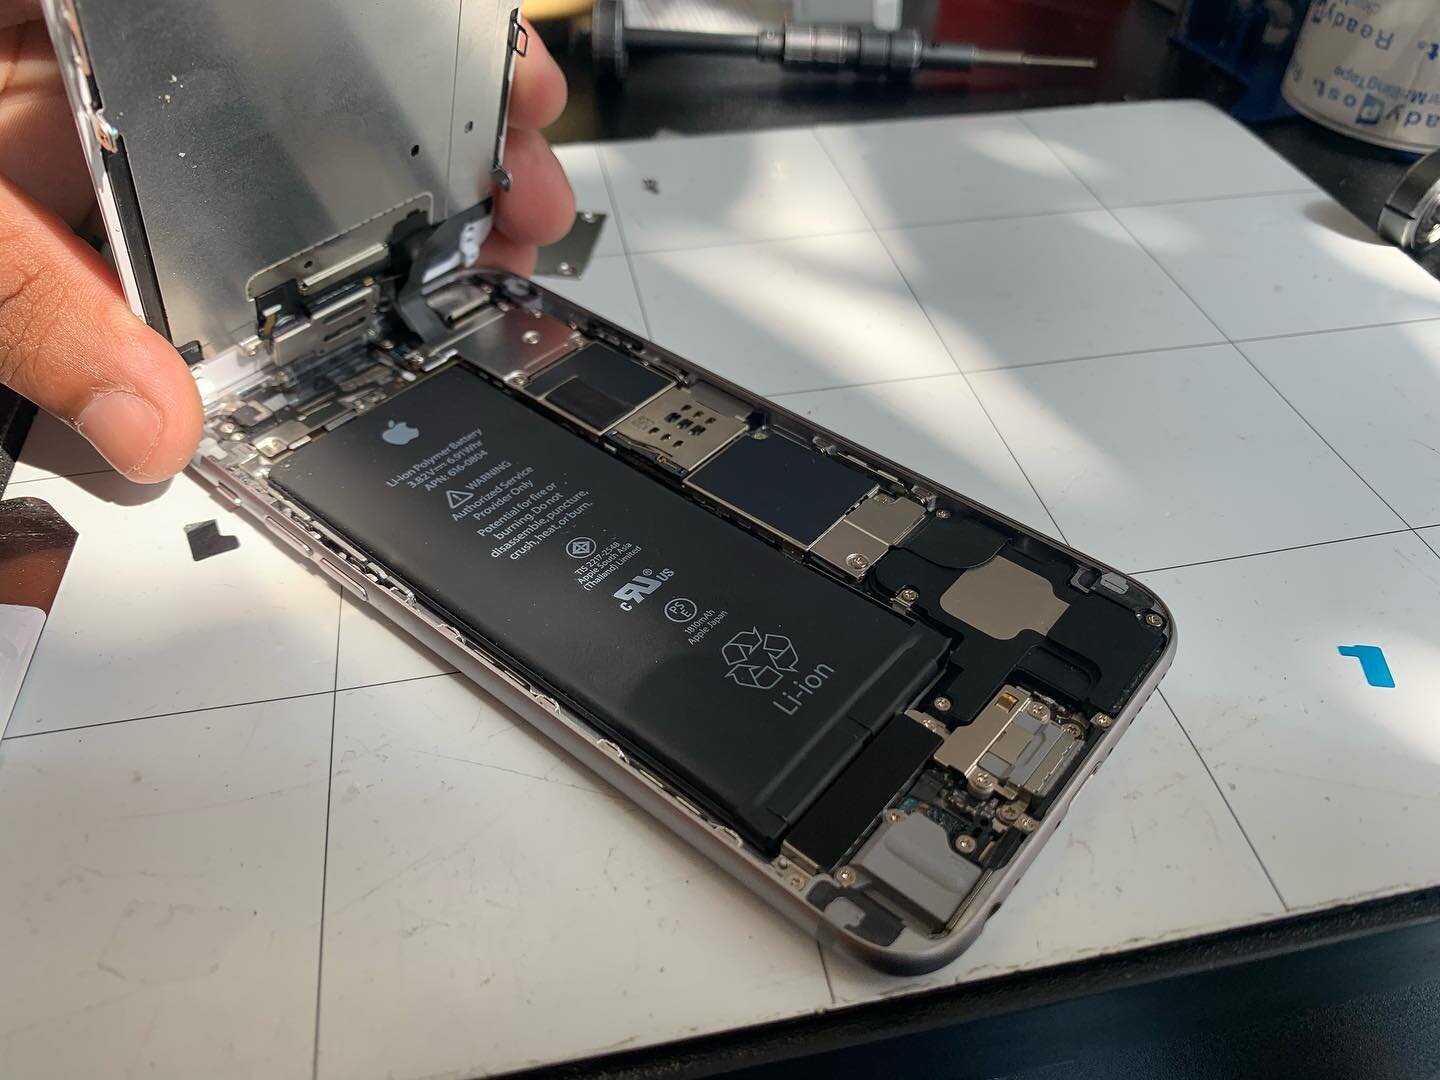 iPhone 6 Screen Repair for Hope. In and out in 30 minutes. 📲Call, Text, or slide in our DMs to schedule an appointment. You have our permission. ⭐️⭐️⭐️⭐️⭐️⠀⠀⠀⠀⠀⠀⠀⠀⠀⠀⠀⠀⠀⠀⠀⠀⠀⠀ ⠀⠀⠀⠀⠀⠀⠀⠀⠀⠀⠀⠀⠀⠀⠀⠀⠀⠀
💻 EzekielTech
📲: (845) 857-5760 ⠀⠀⠀⠀⠀⠀⠀⠀⠀⠀⠀⠀⠀⠀⠀⠀⠀⠀⠀⠀ ?